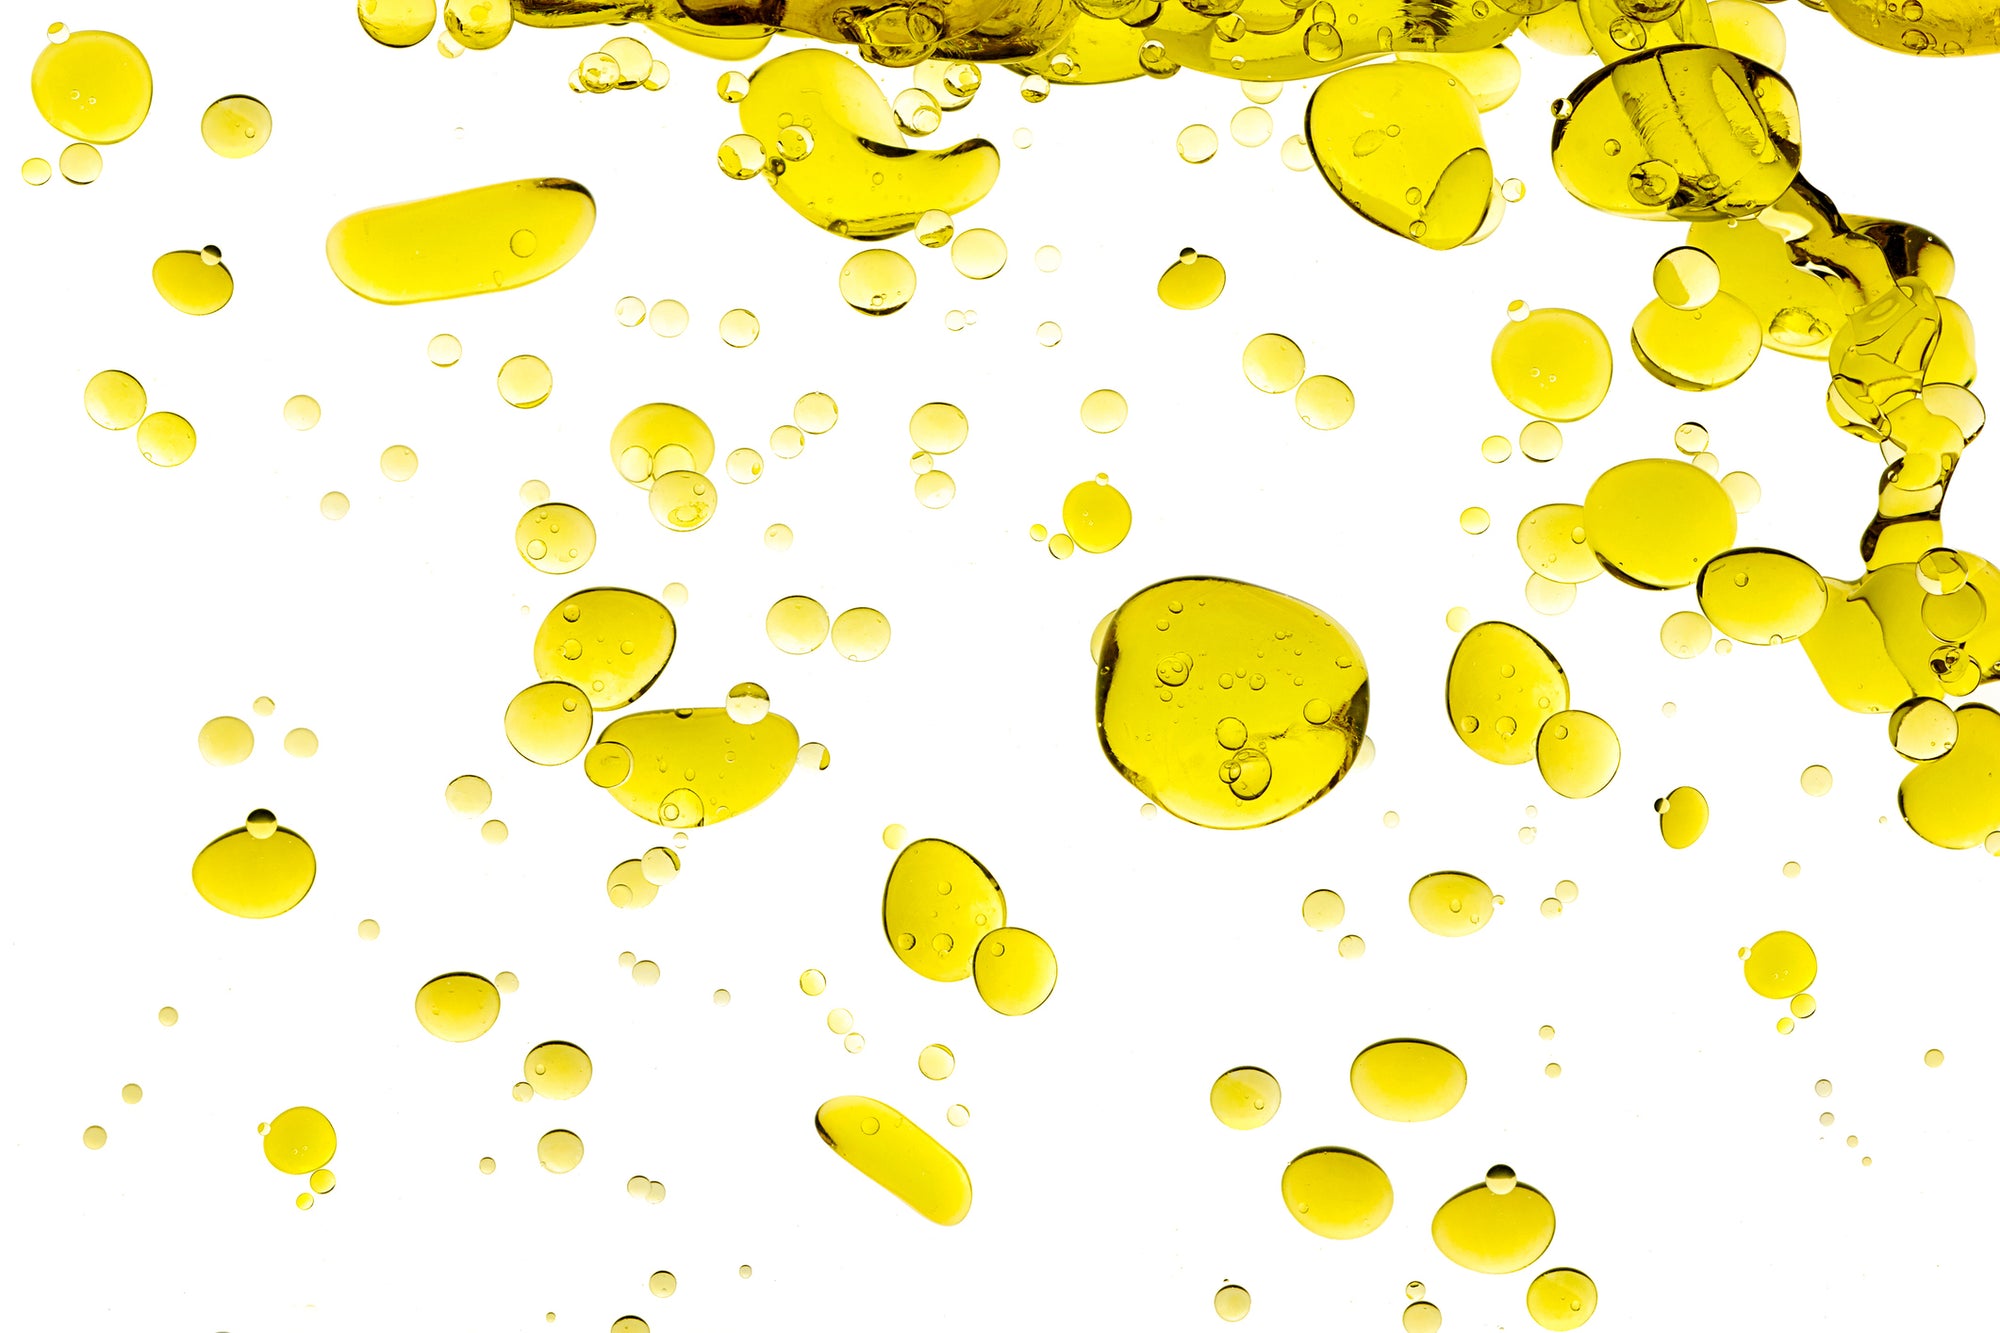 What are Emulsifiers and Solubilizers?